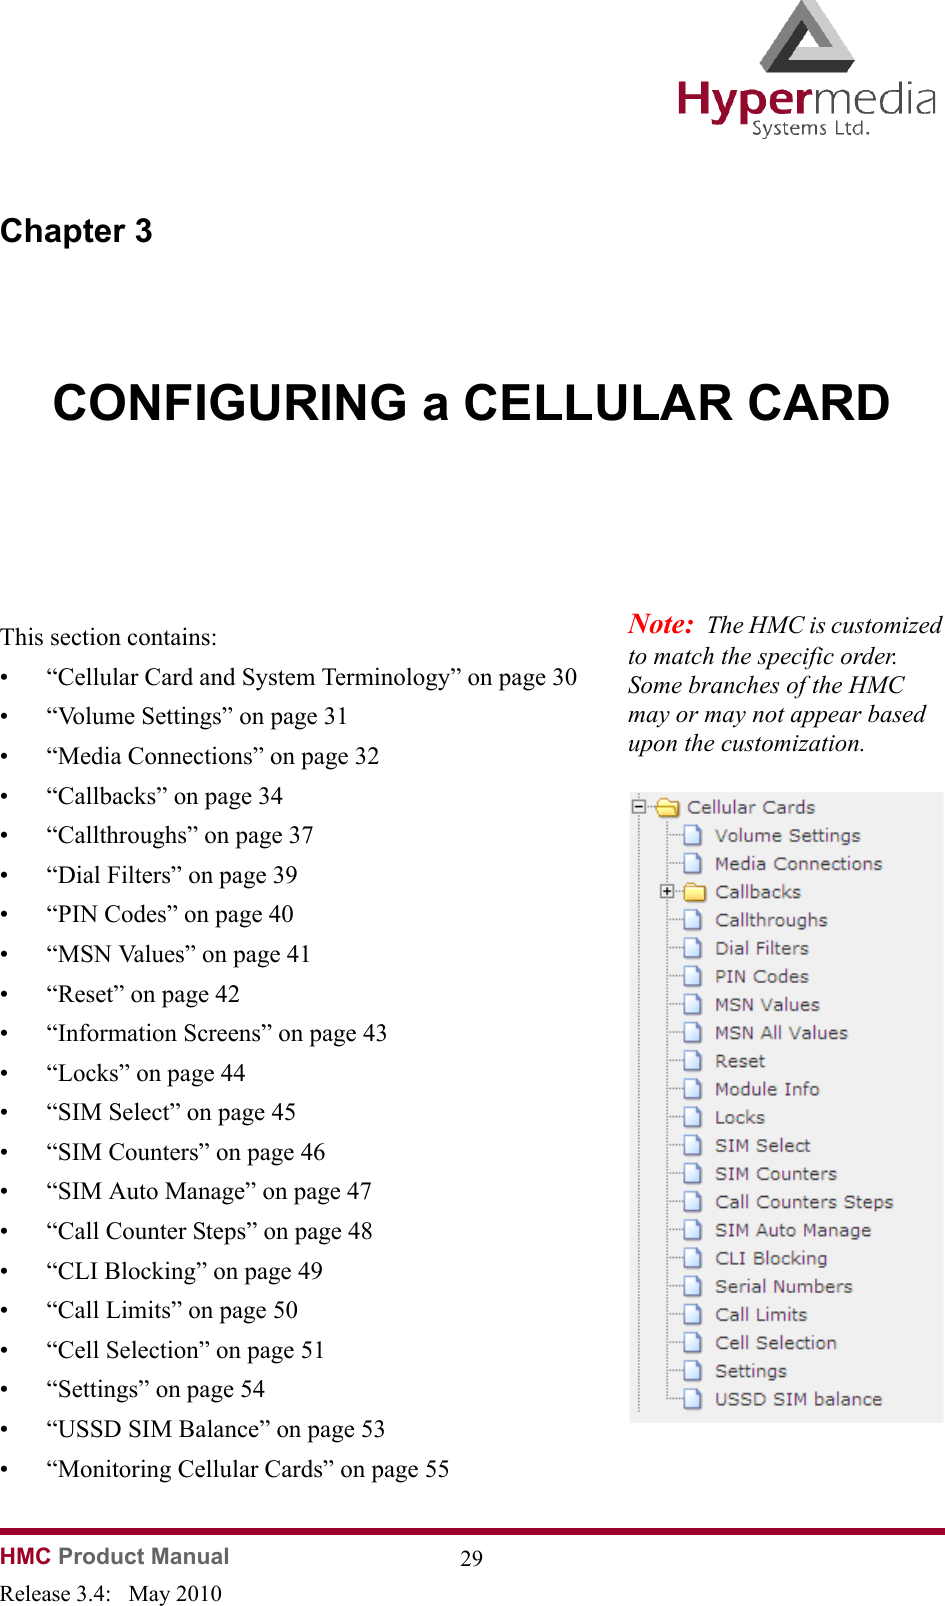 HMC Product Manual  29Release 3.4:   May 2010Chapter 3CONFIGURING a CELLULAR CARD              This section contains:• “Cellular Card and System Terminology” on page 30• “Volume Settings” on page 31• “Media Connections” on page 32• “Callbacks” on page 34• “Callthroughs” on page 37• “Dial Filters” on page 39• “PIN Codes” on page 40• “MSN Values” on page 41• “Reset” on page 42• “Information Screens” on page 43• “Locks” on page 44• “SIM Select” on page 45• “SIM Counters” on page 46• “SIM Auto Manage” on page 47• “Call Counter Steps” on page 48• “CLI Blocking” on page 49• “Call Limits” on page 50• “Cell Selection” on page 51• “Settings” on page 54• “USSD SIM Balance” on page 53• “Monitoring Cellular Cards” on page 55Note:  The HMC is customized to match the specific order.  Some branches of the HMC may or may not appear based upon the customization.